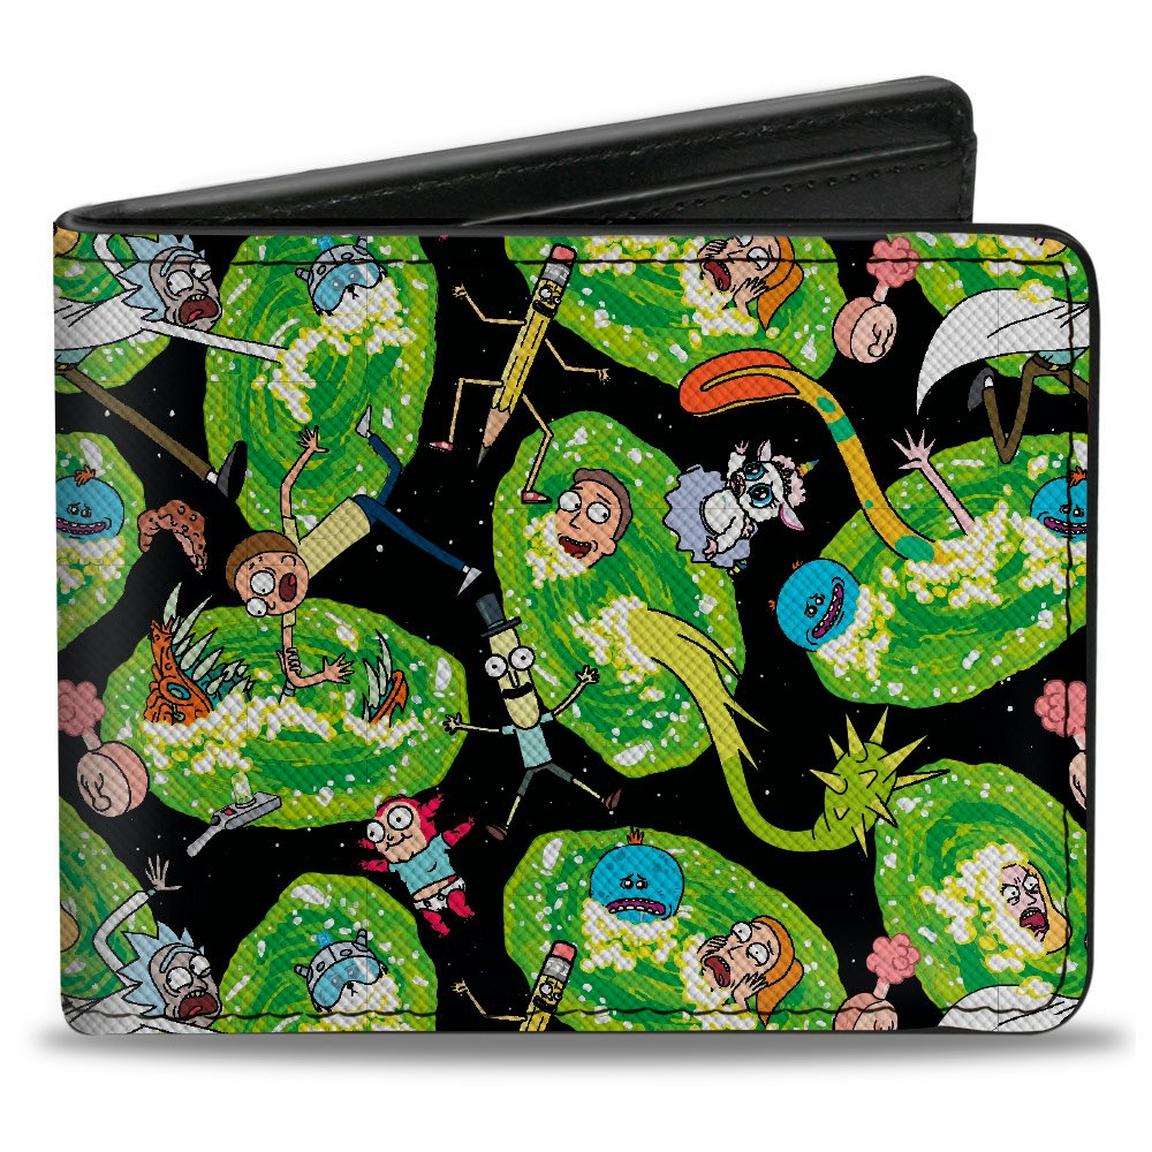 Buckle-Down Rick and Morty Rick and Morty Polyurethane Bifold Wallet, Size: One Size, Buckle Down